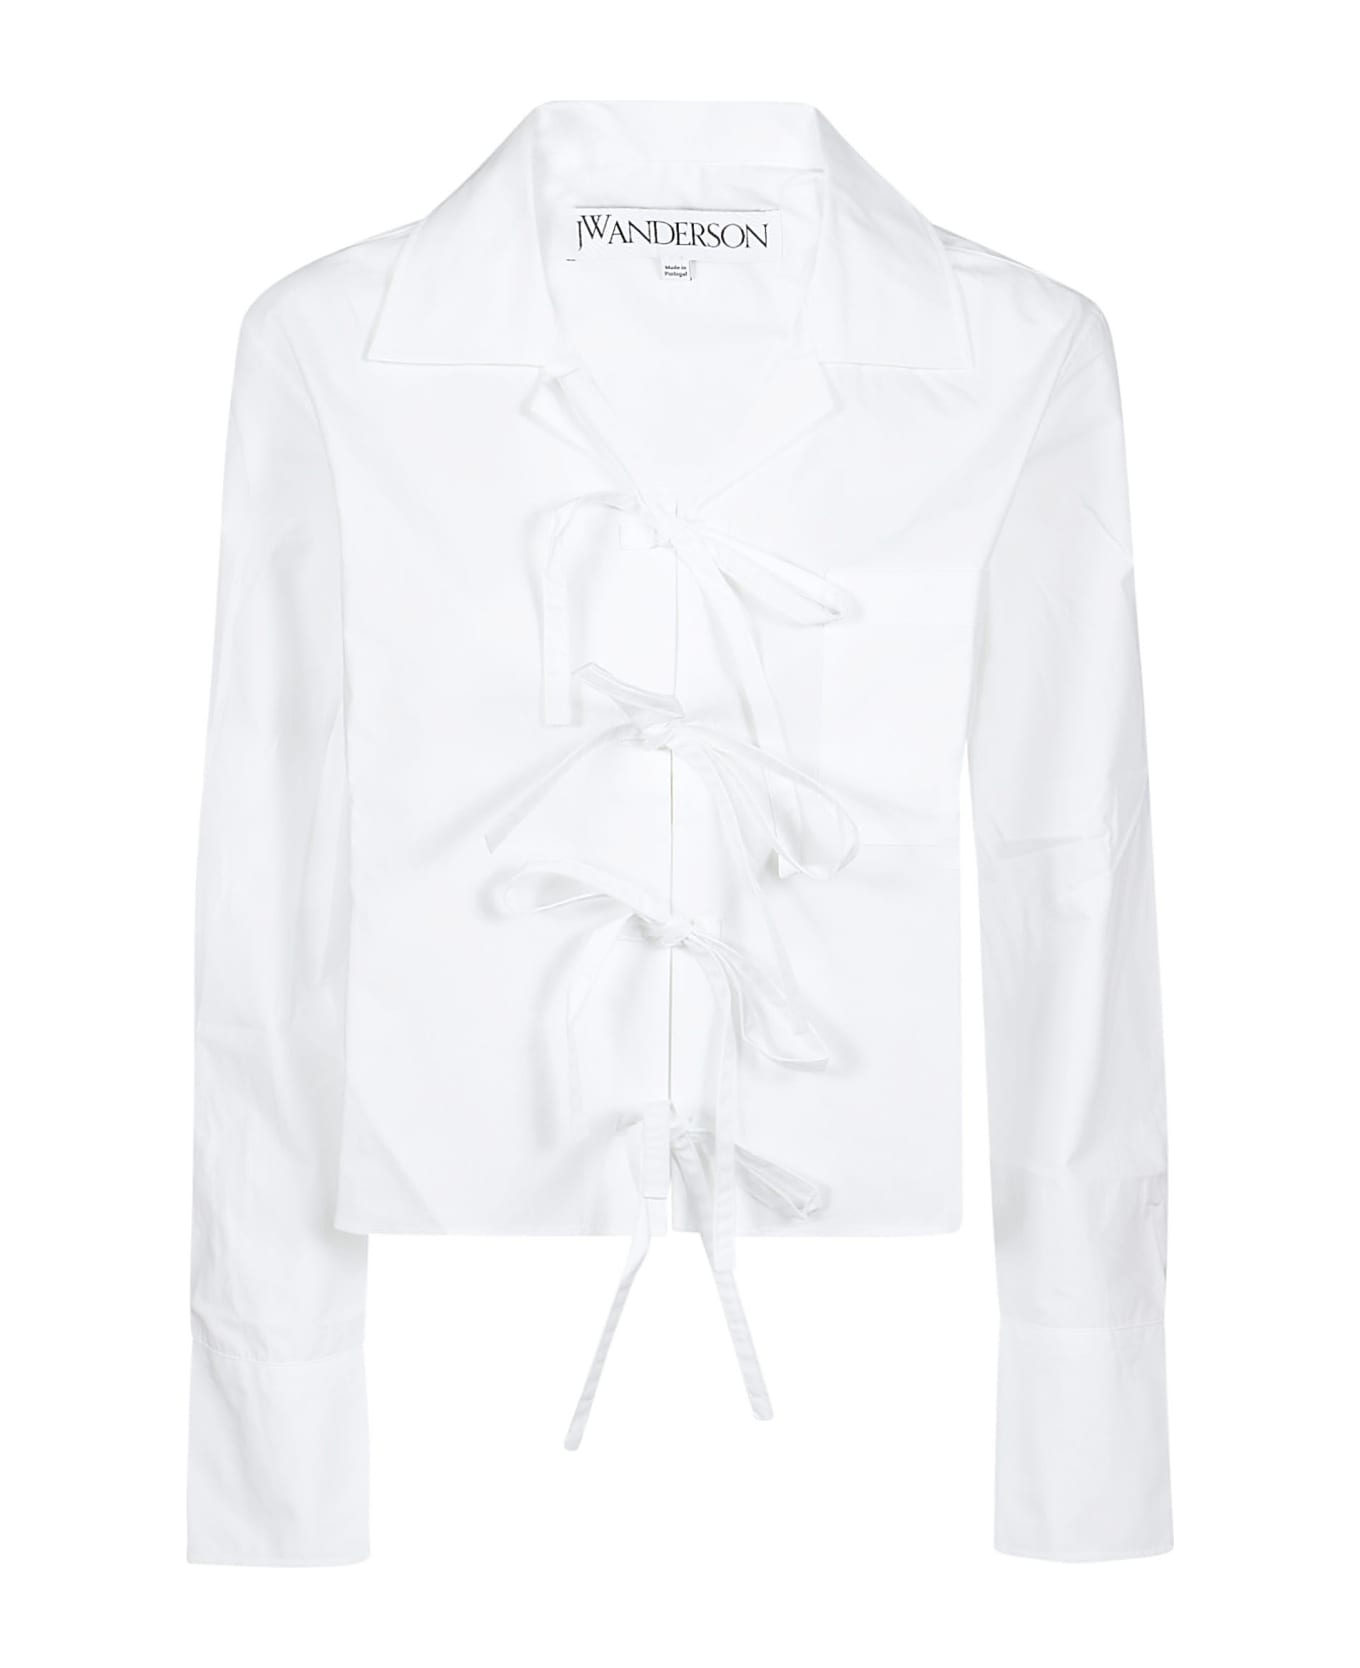 J.W. Anderson Bow Tie Cropped Shirt - White